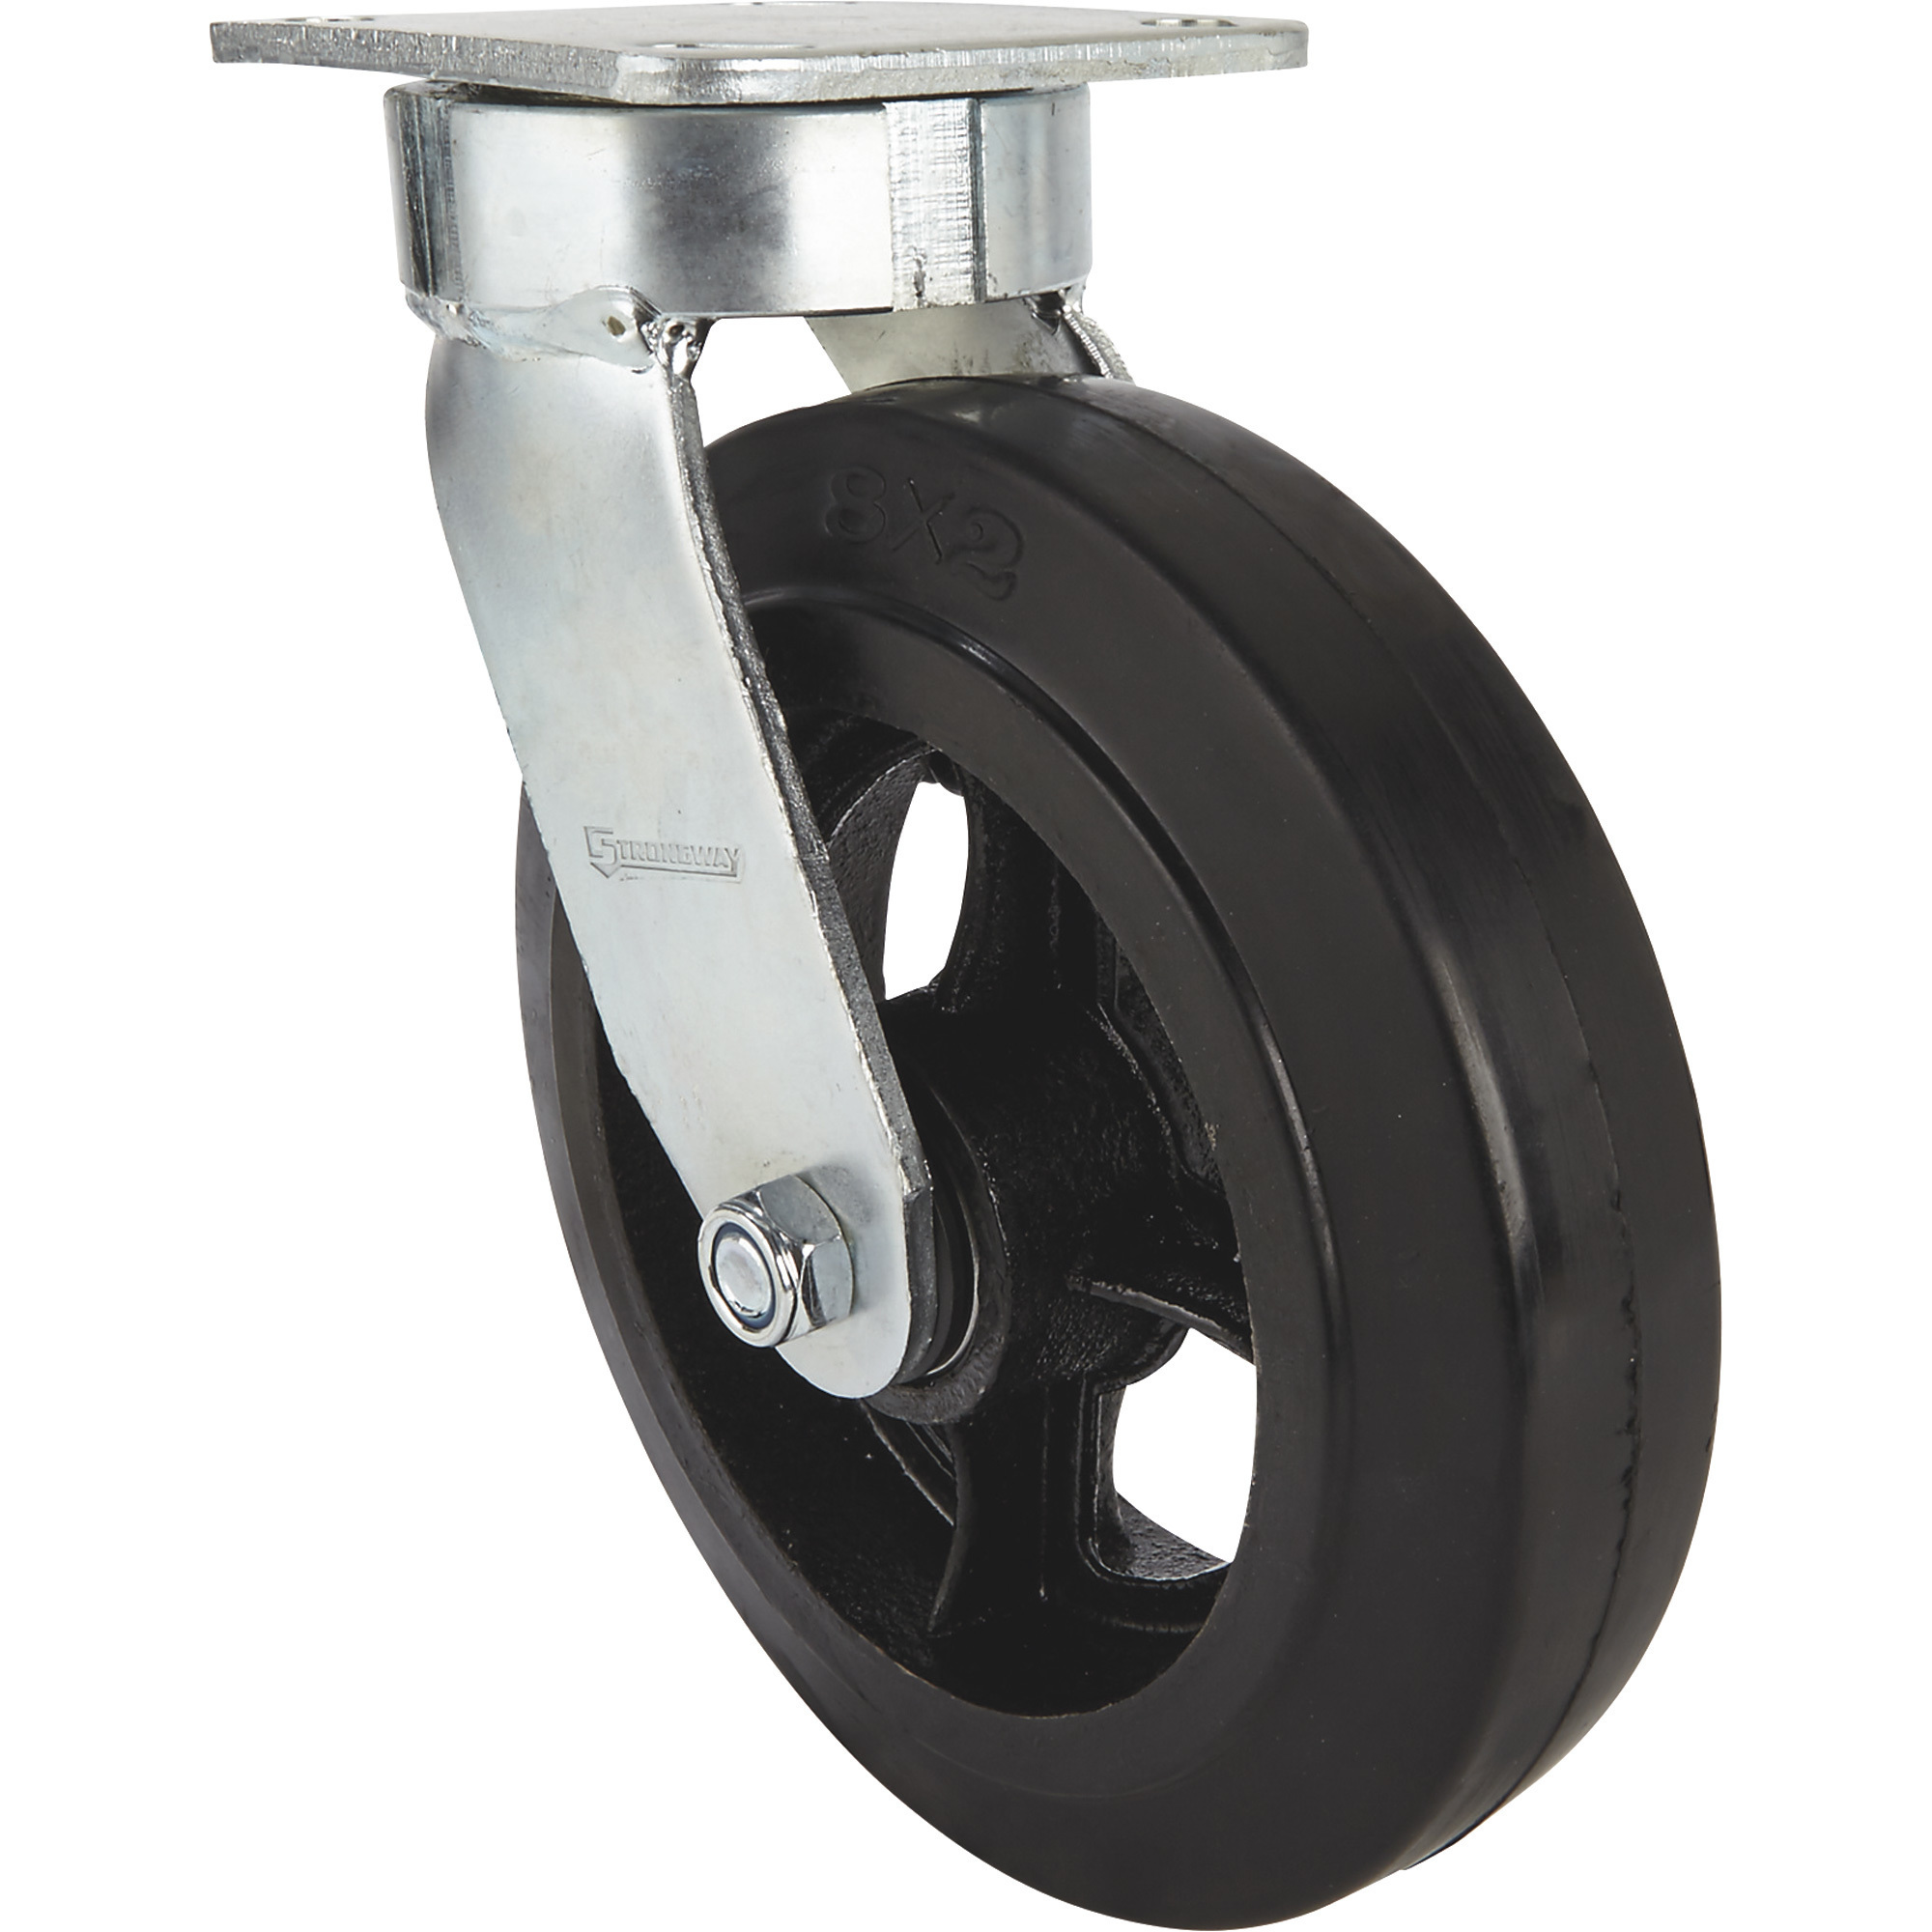 Strongway 8Inch Swivel Kingpinless Rubber/Steel Core Caster, 900-Lb. Capacity